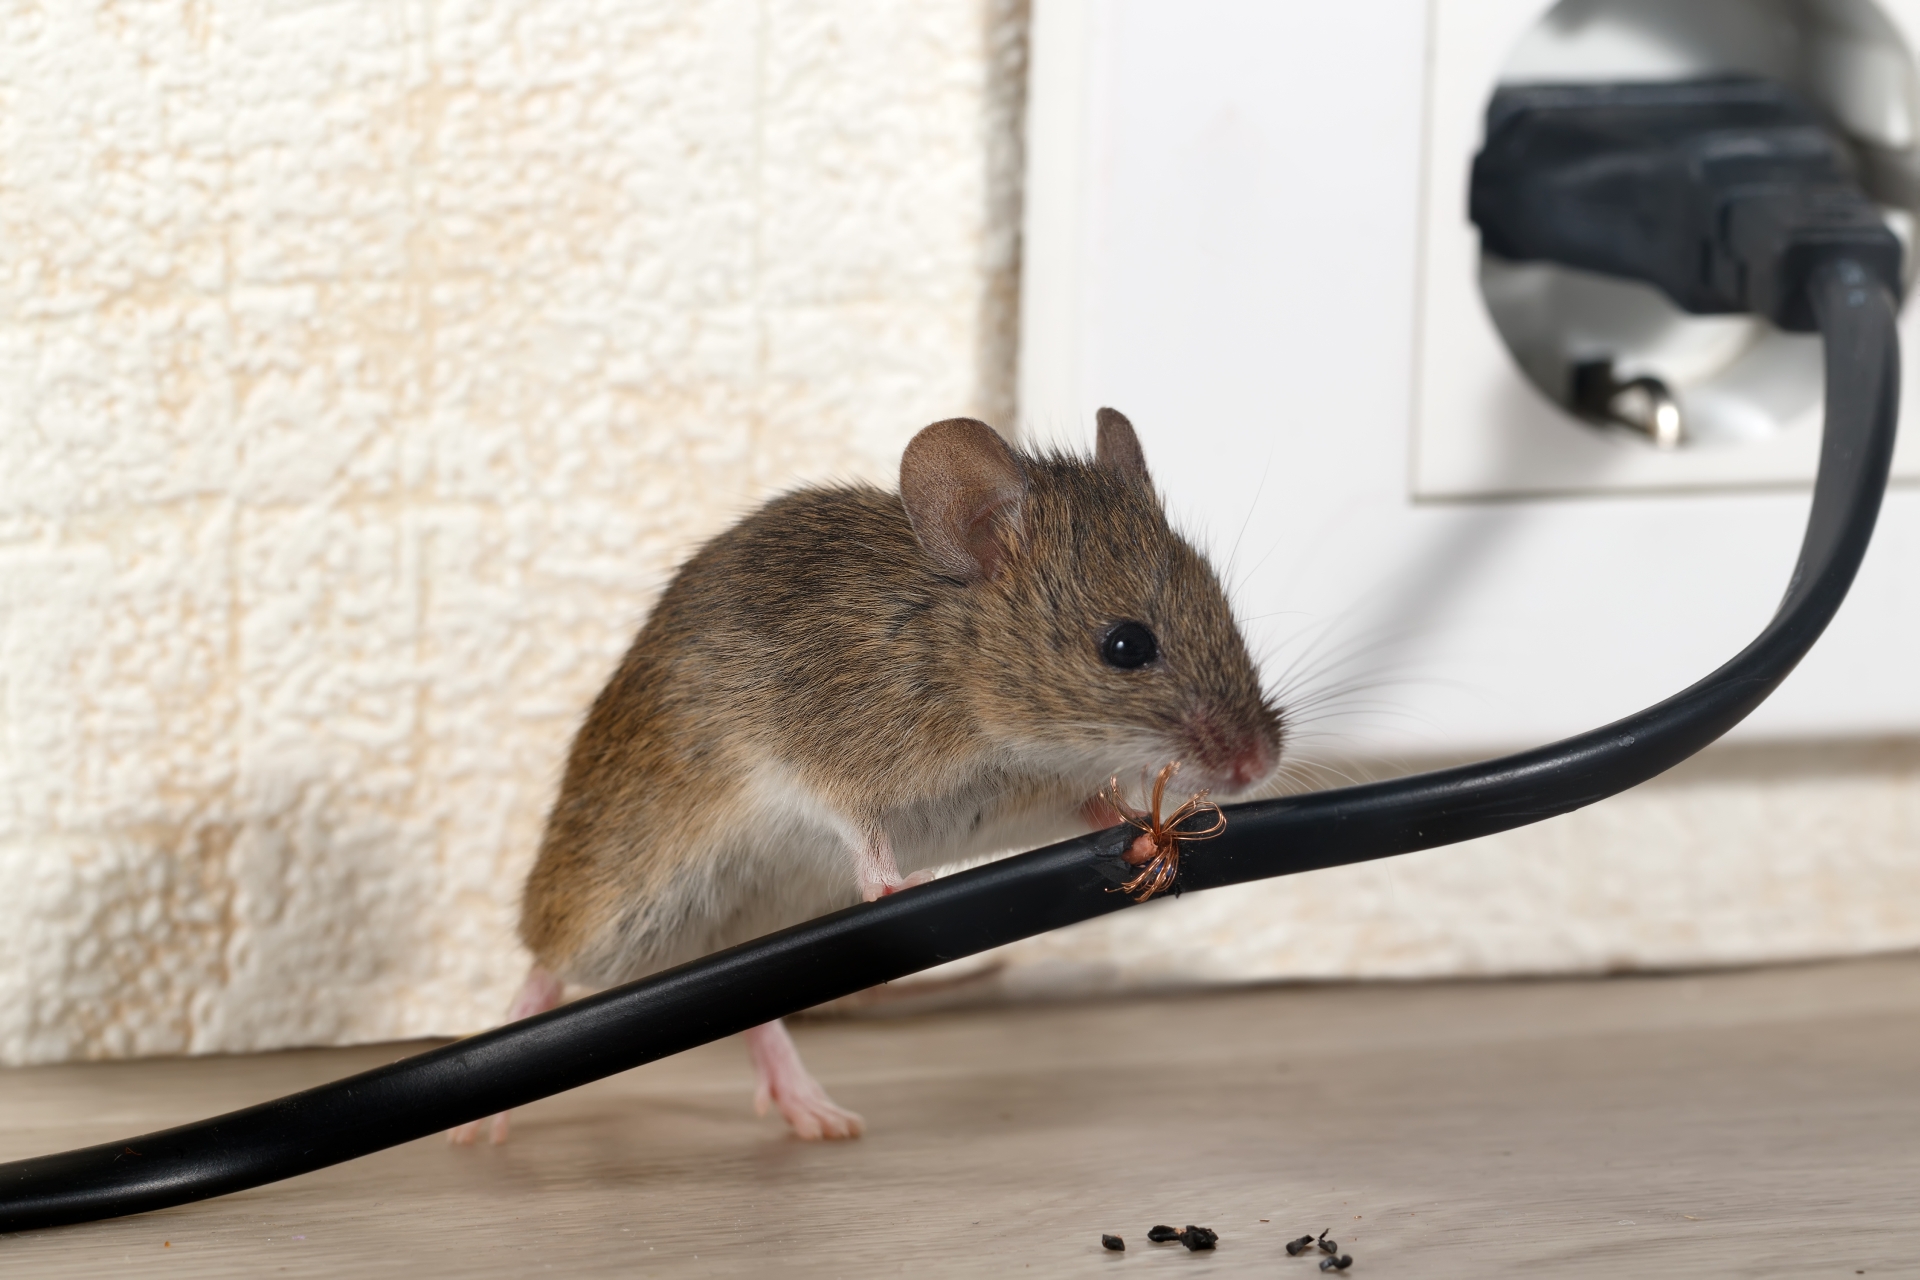 Mice Infestation, Pest Control in West Brompton, World's End, SW10. Call Now 020 8166 9746